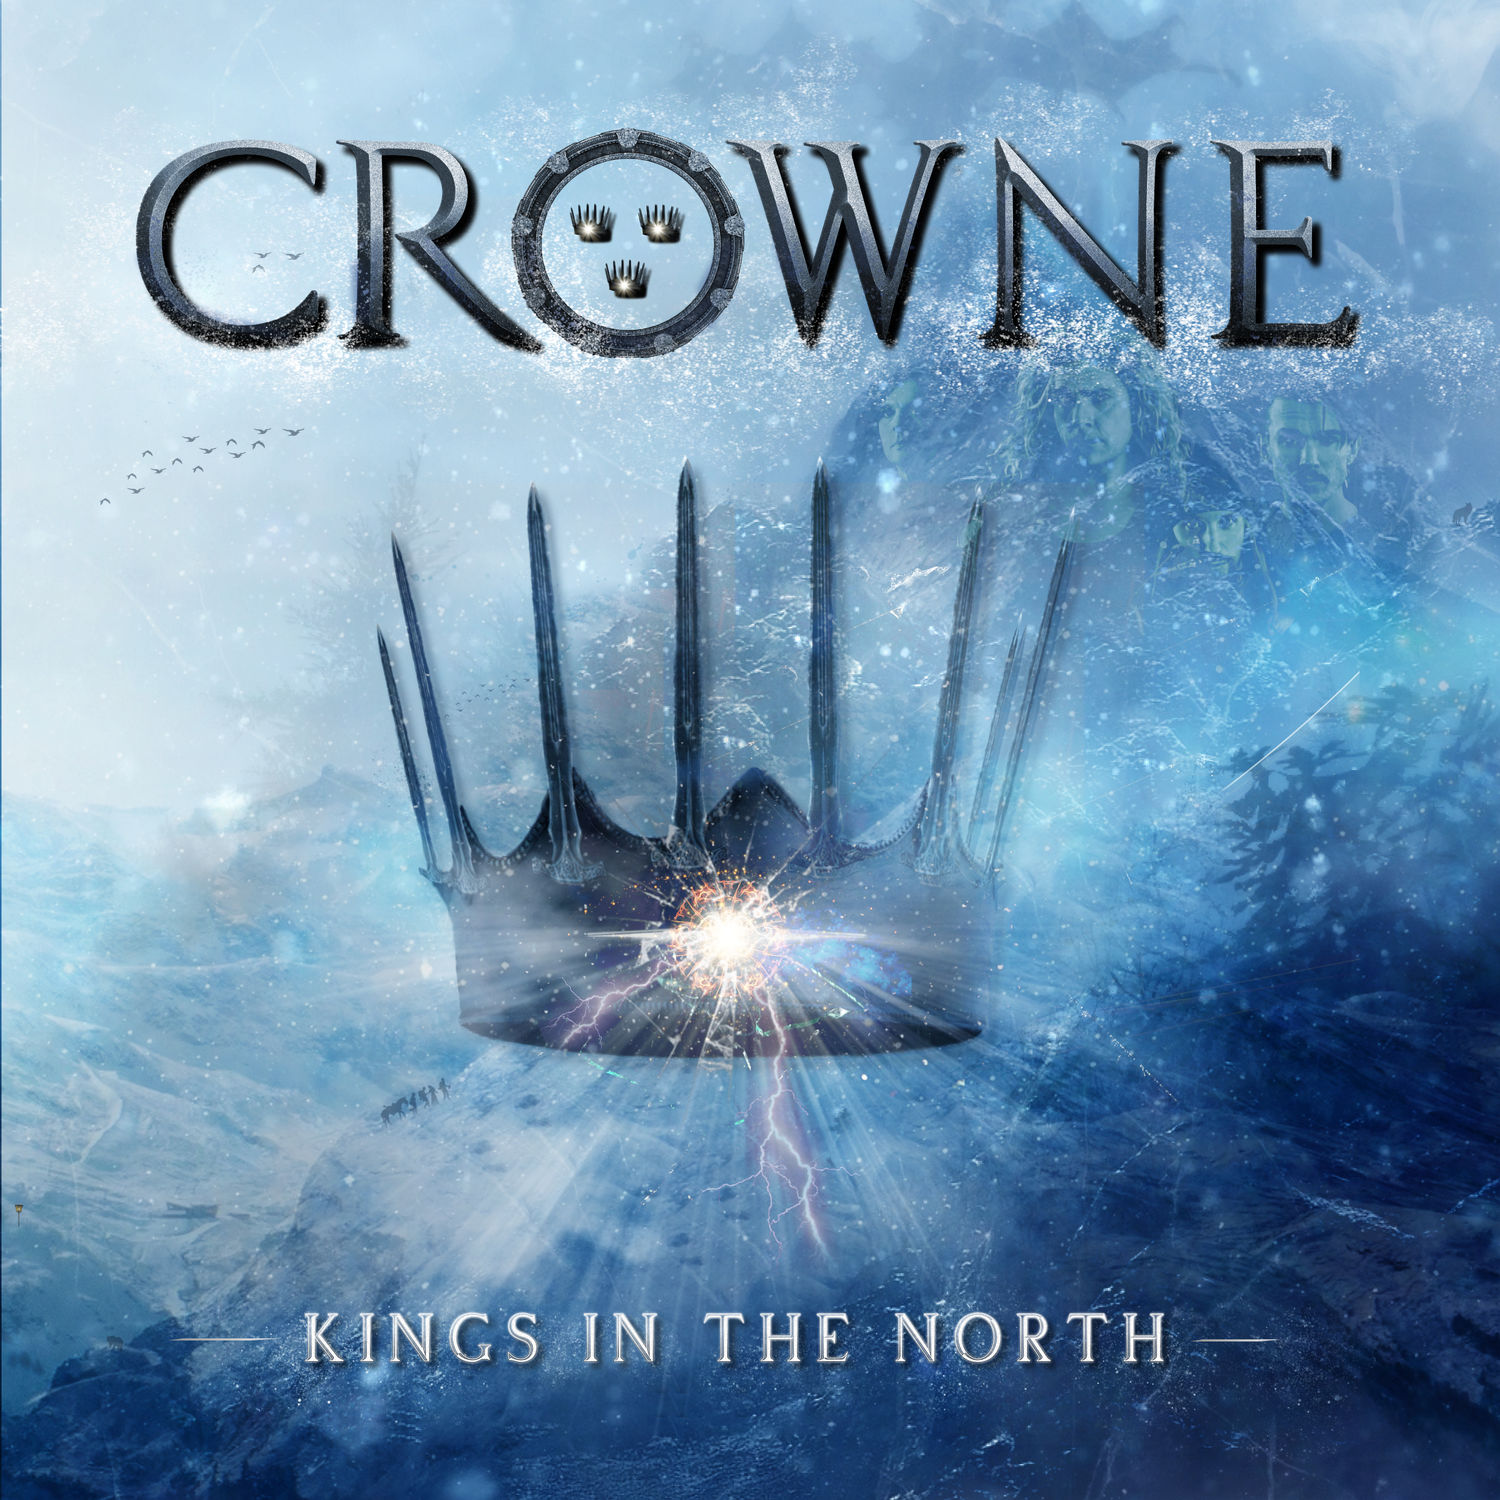 Crowne - Kings in the North (2021) [FLAC 24bit/44,1kHz]